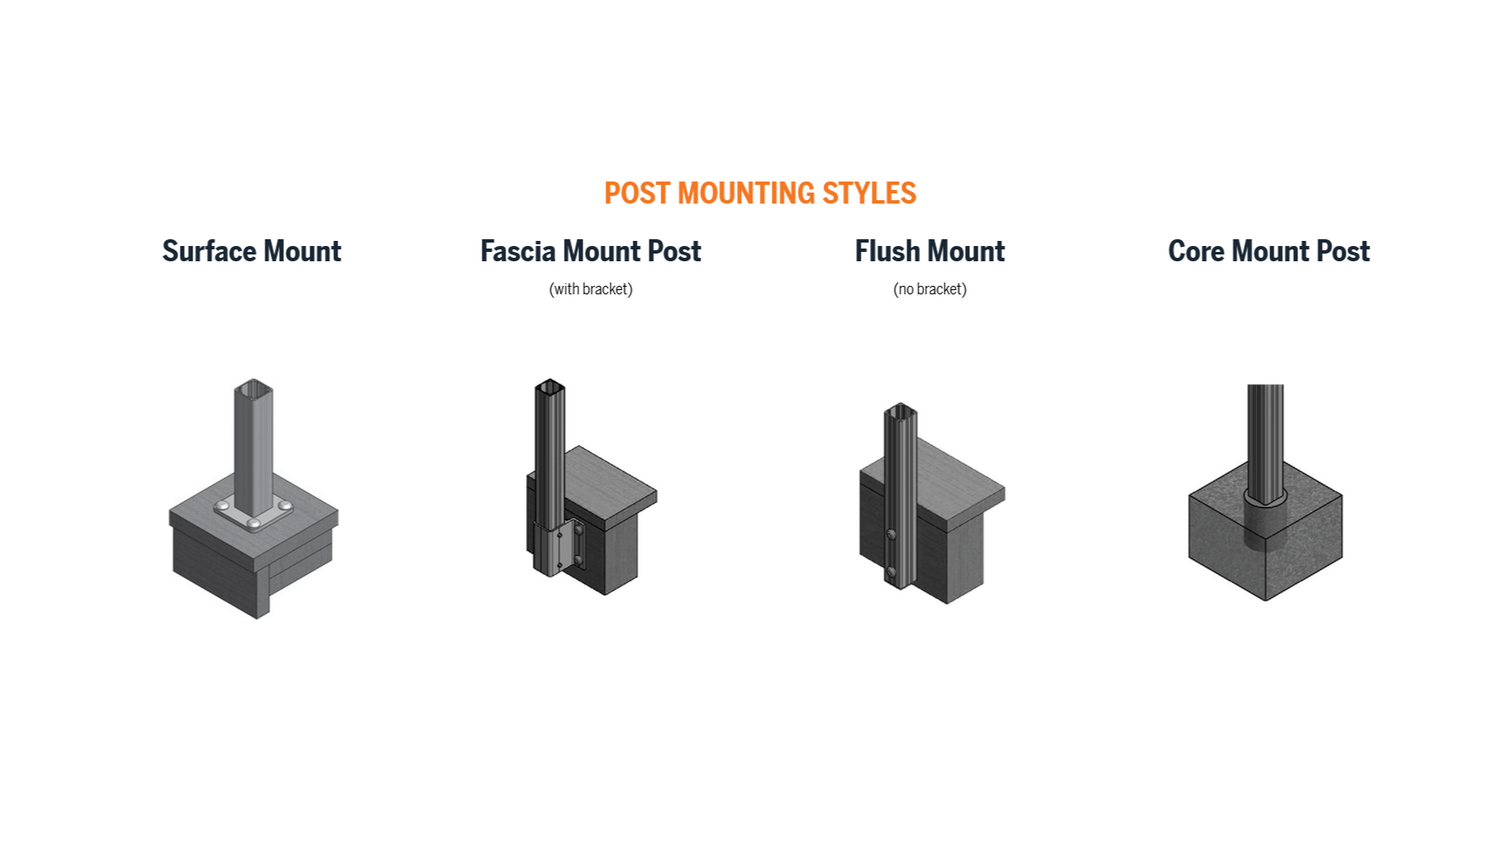 CabelFX post types include surface mount top mount or base mount, Fascia mount attaches to flat side or fascia, Fascia bracket mount for overhanged decking and core mount for concrete installation of posts